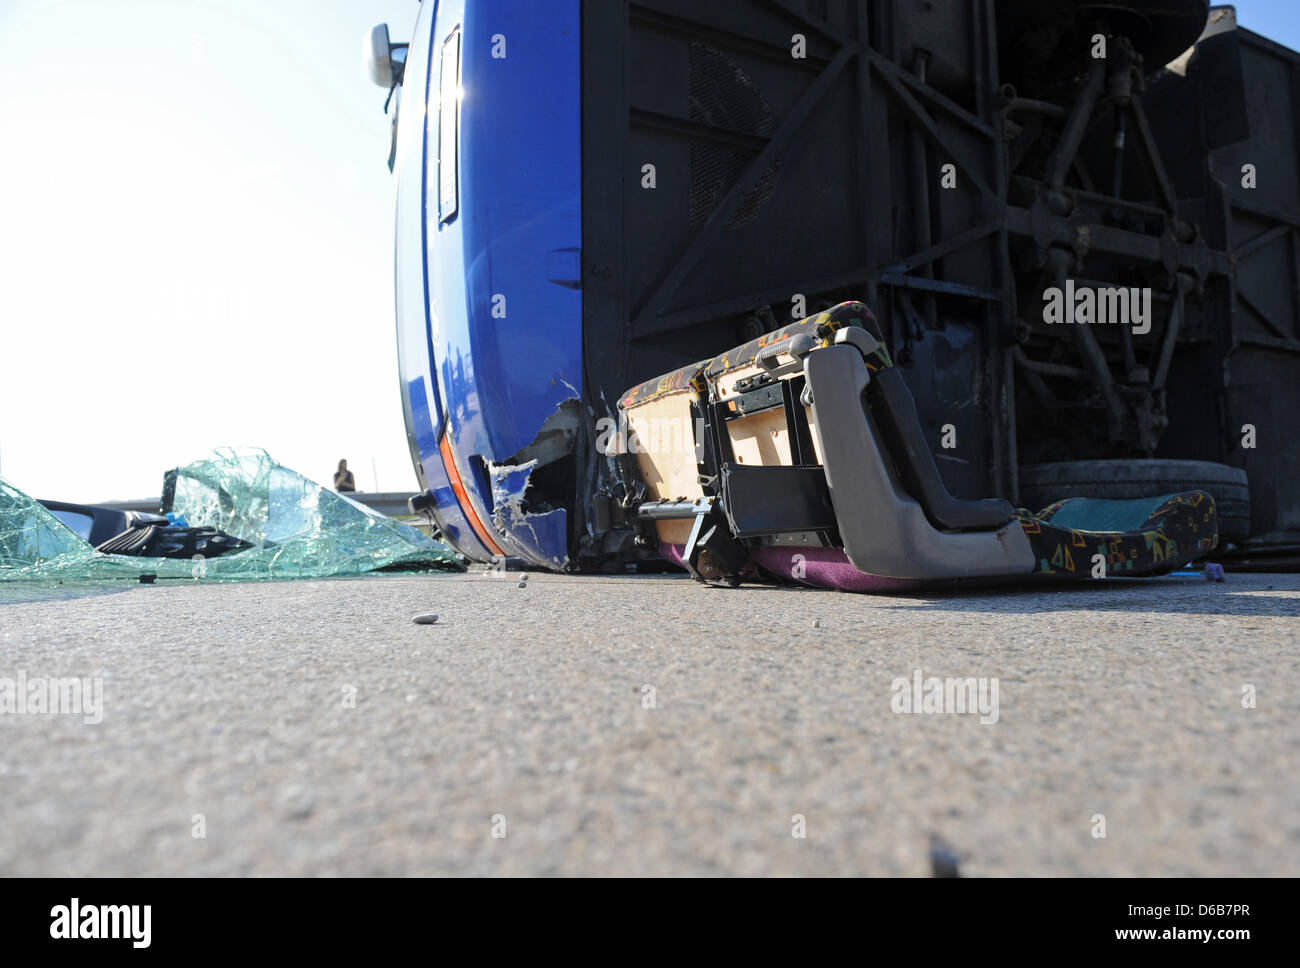 A sheet of glass and two seats sit next to a tour bus on its side on Autobahn A92 between the Neufahrn interchange and the exit Freising Sued near Freising, Germany, 22 August 2012. More than 35 people were injured in the accident, including 30 children, according to the police. The bus lost control in the sudden heavy rain and hail, according to eye witnesses. Photo: ANDREAS GEBER Stock Photo